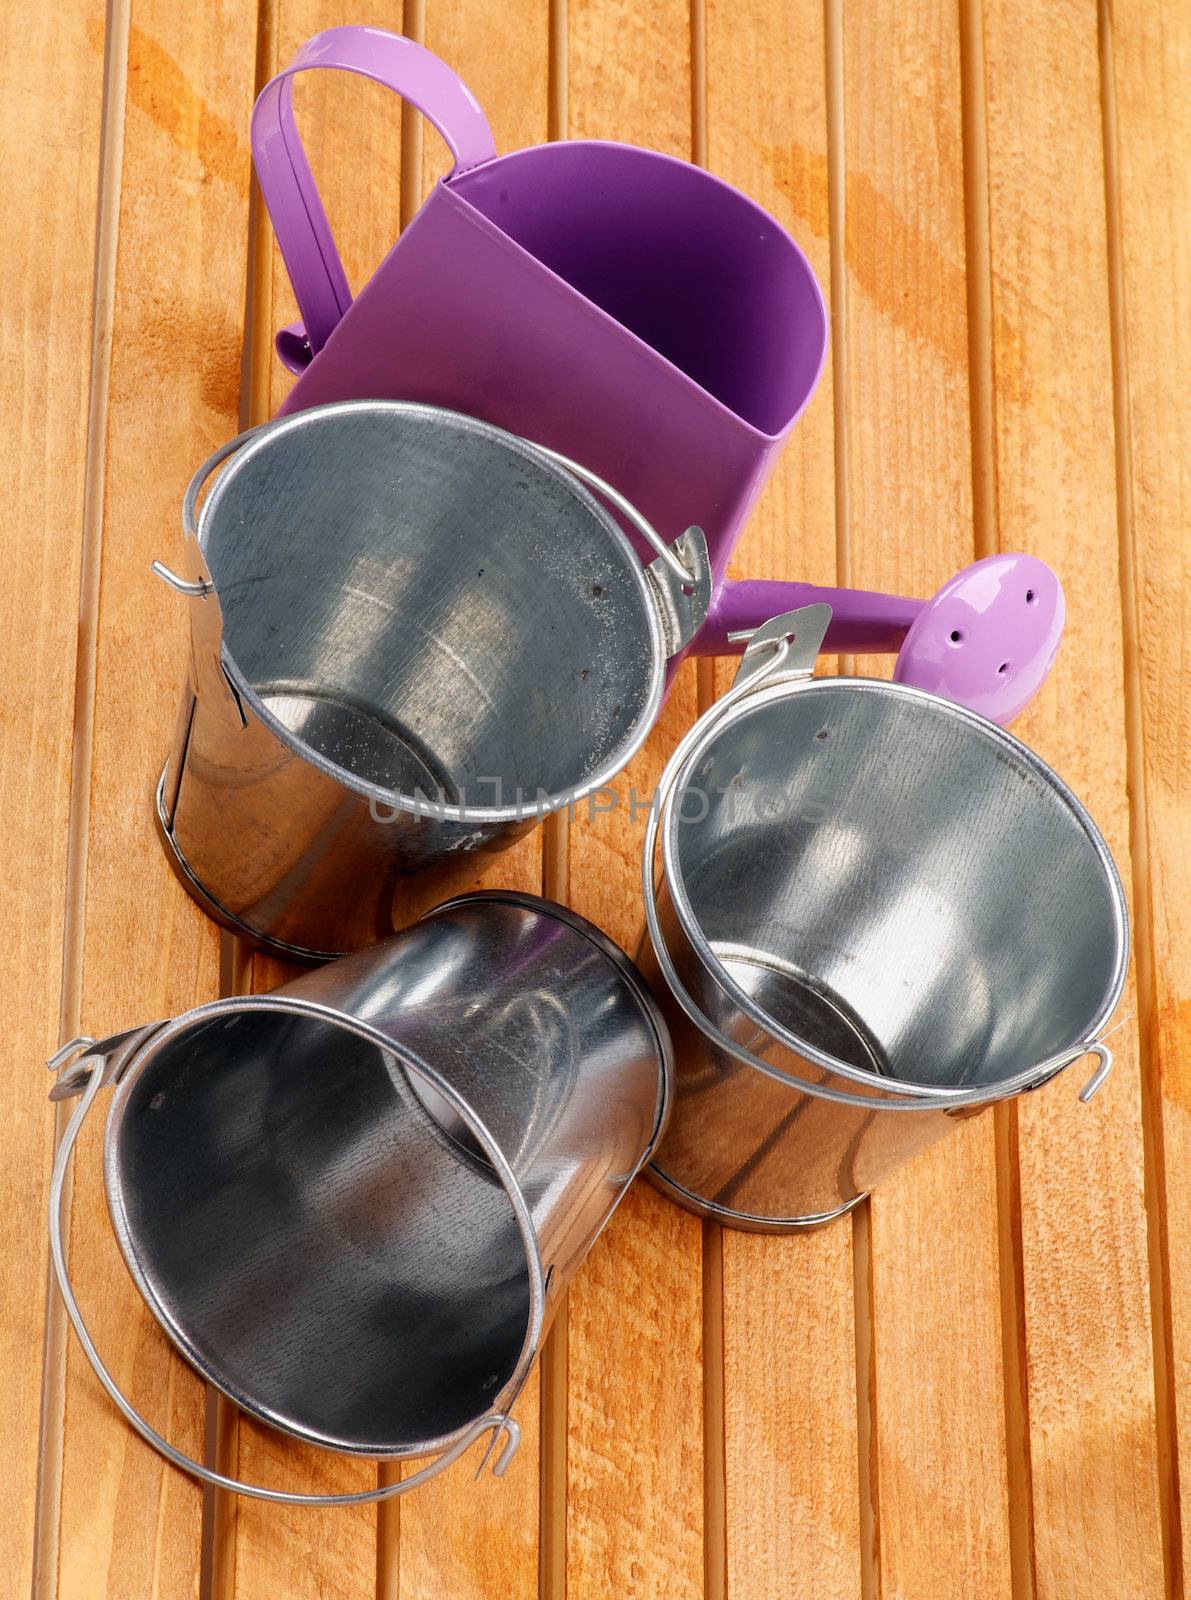 Garden Utensil with Tin Buckets and Watering Can on wooden background